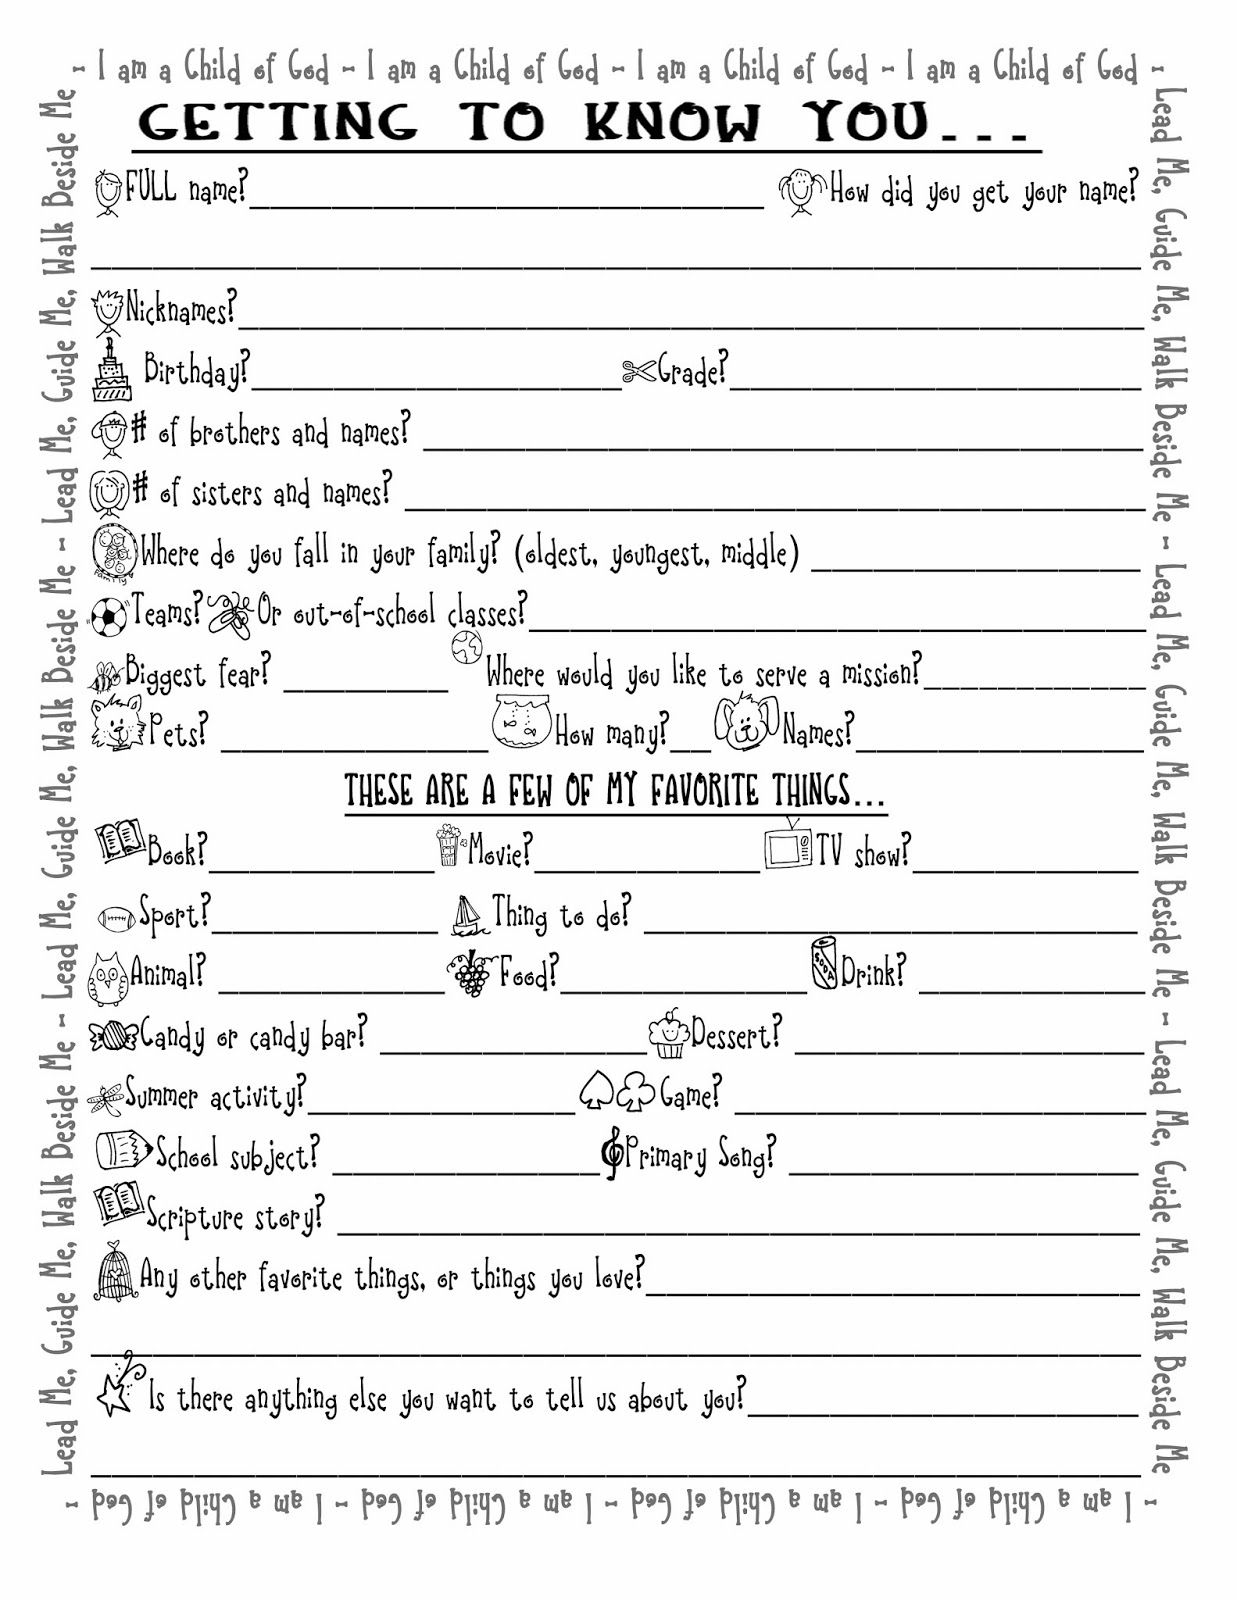 Worksheet : Getting To Know You Questions For Kids The Best | Printable Getting To Know You Worksheets